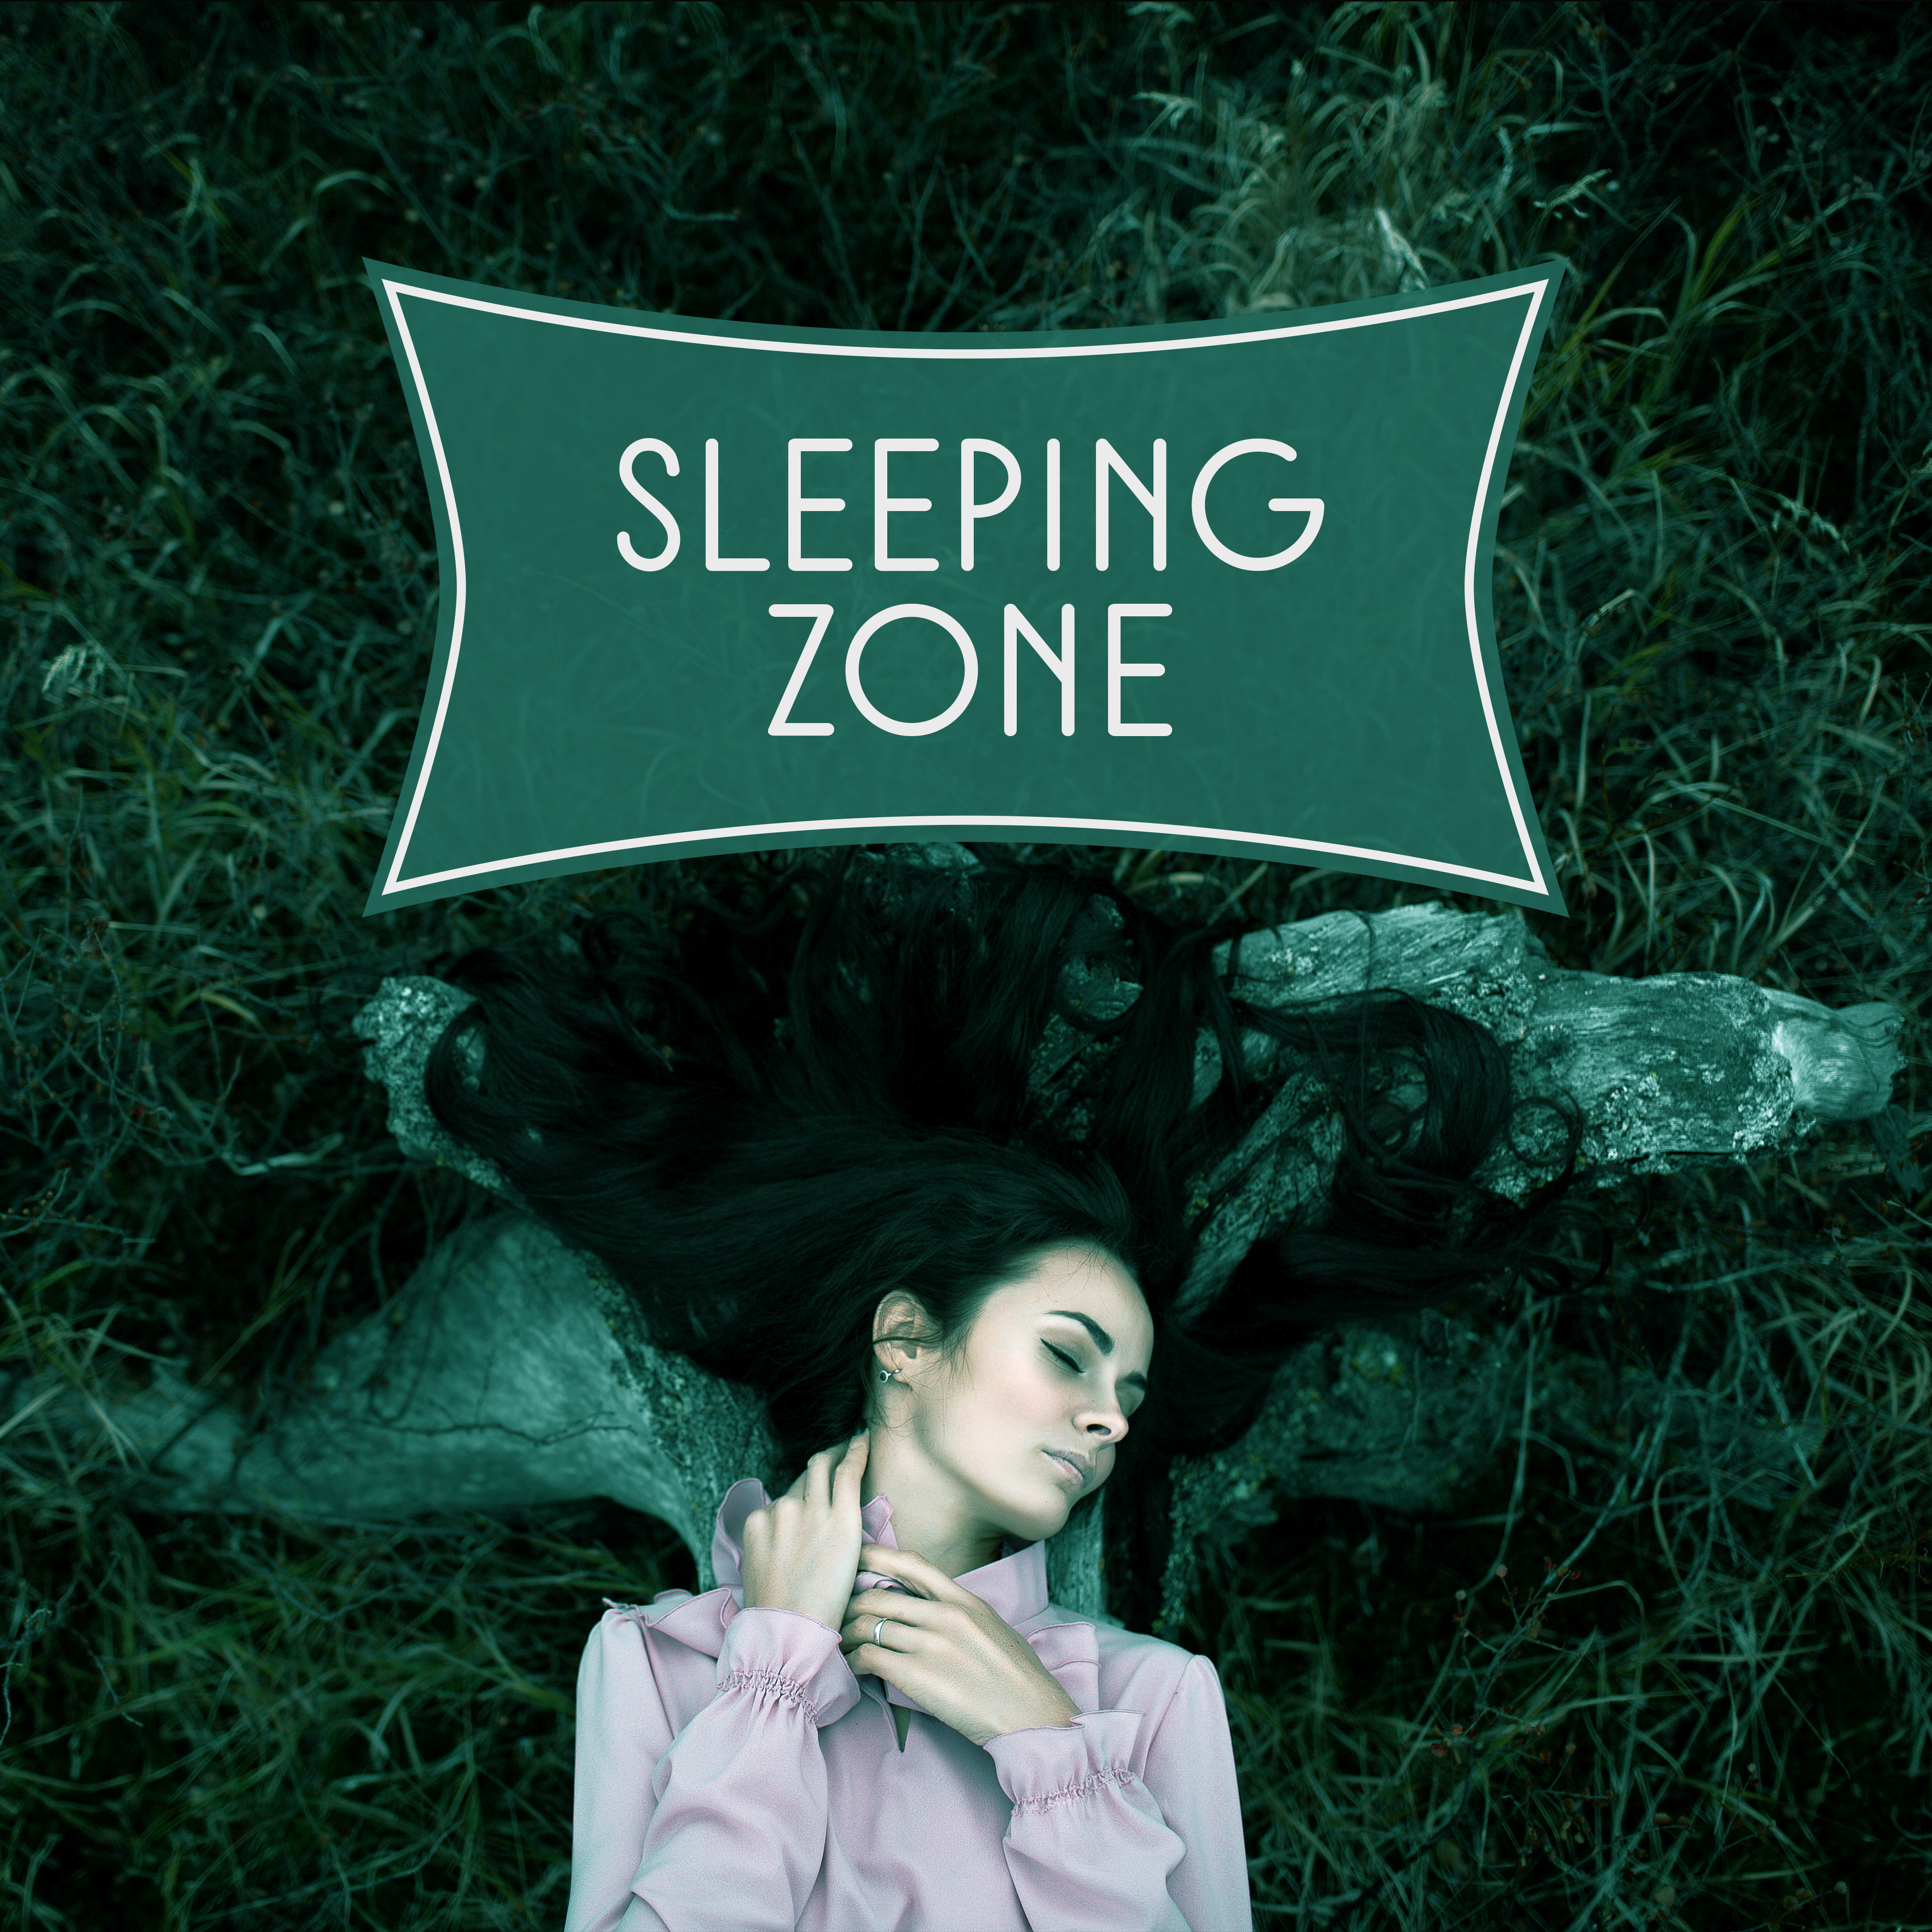 Sleeping Zone – Calming Nature Sounds for Falling Asleep, Relax Before Sleep, Full Rest